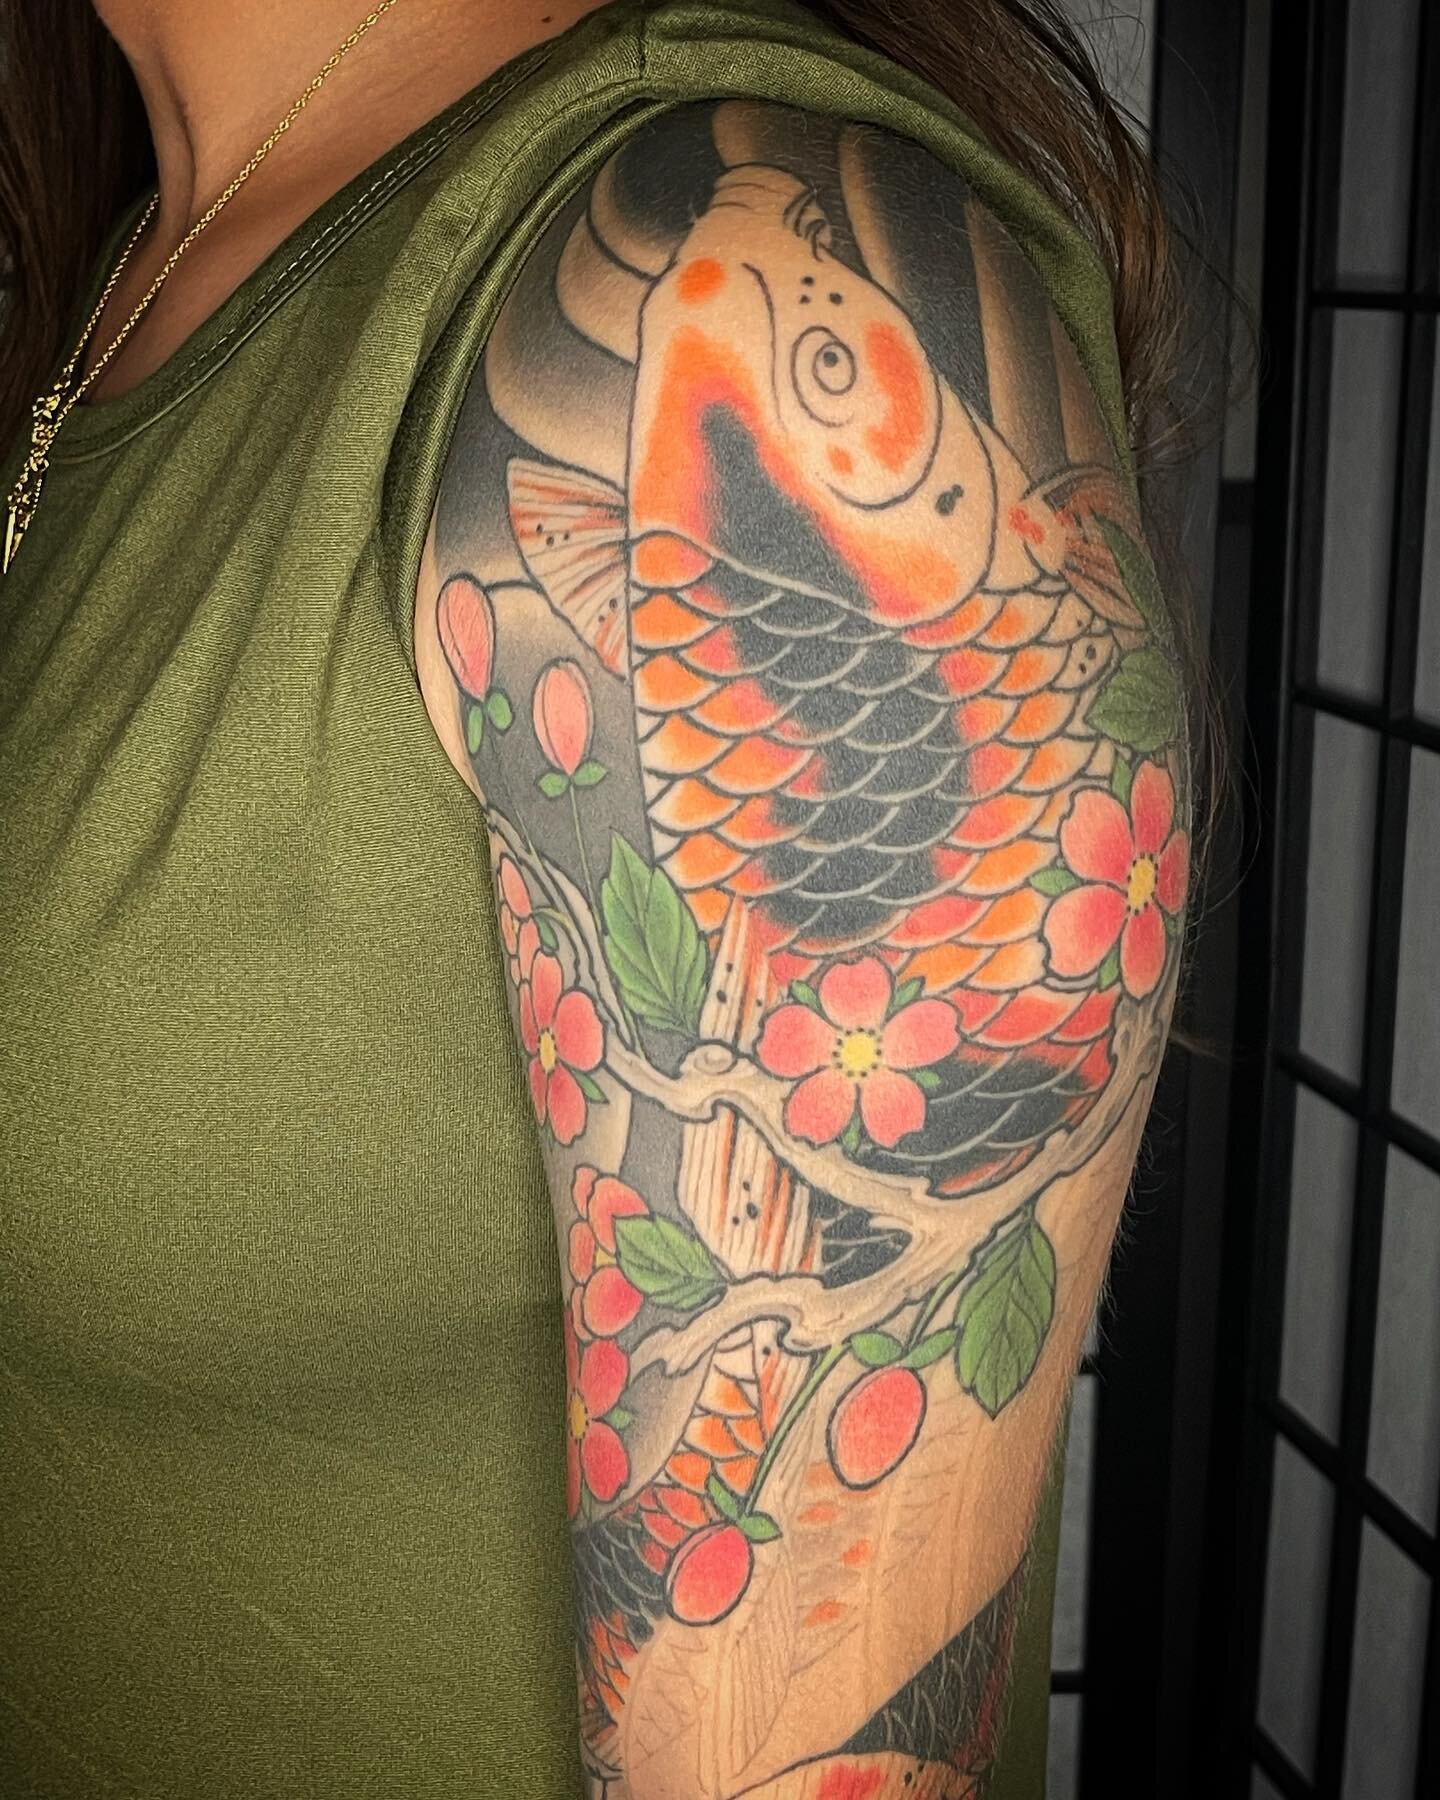 Healed work from a piece I completed a few years ago. It&rsquo;s so nice when clients stop by and I can see how well my tattoos retain their integrity 

#japanesetattoo #papercranestudio #sleevetattoo #colortattoo #longbeachtattooartist #girlswithtat